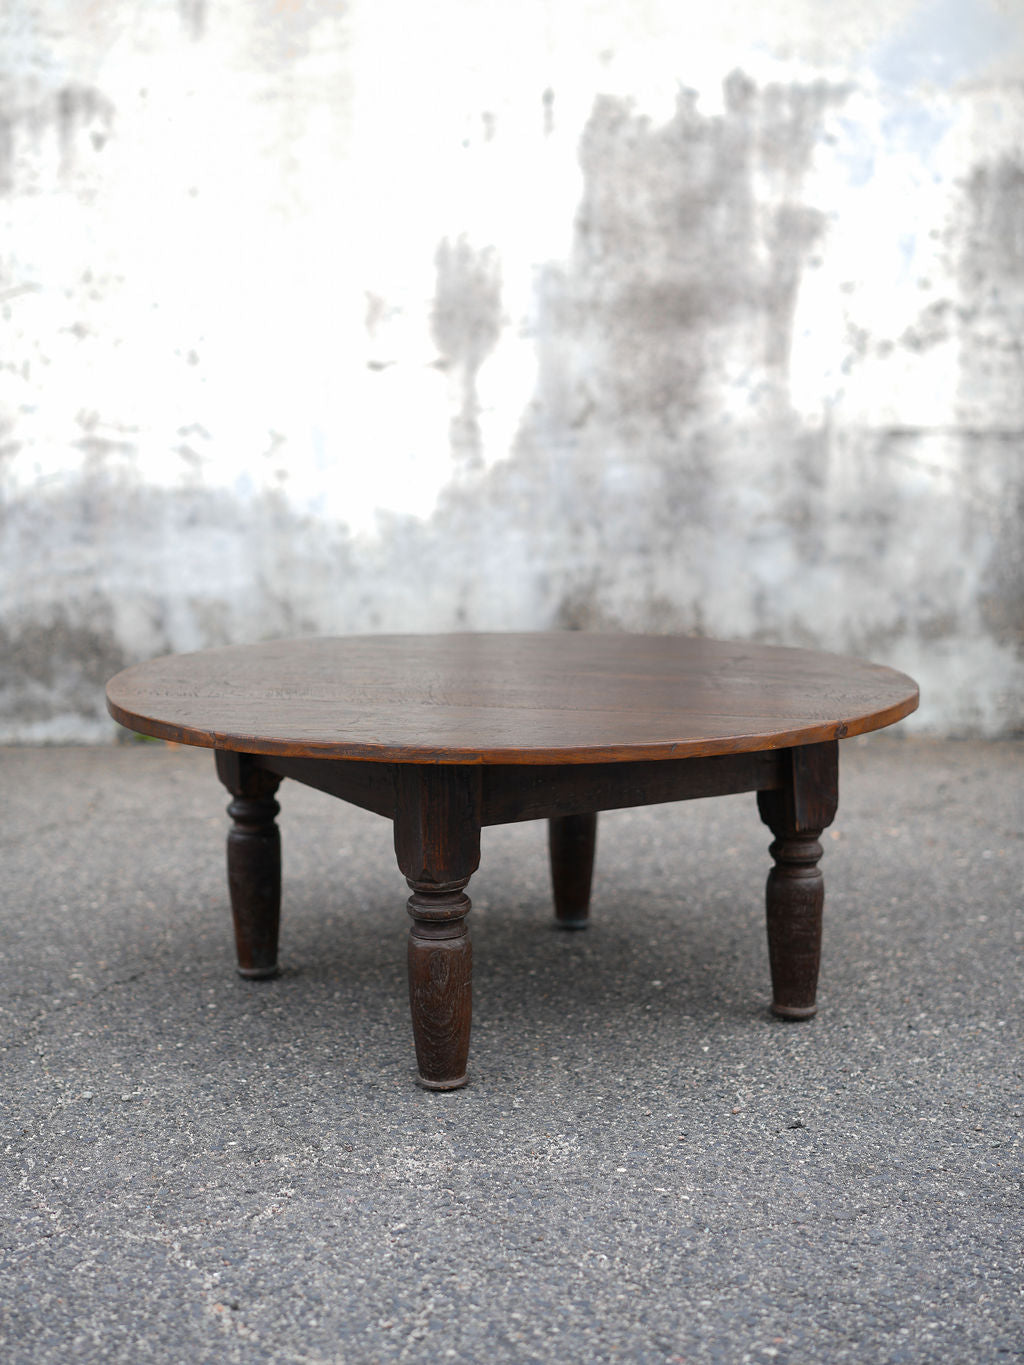 One-of-a-Kind Antique Round Coffee Table